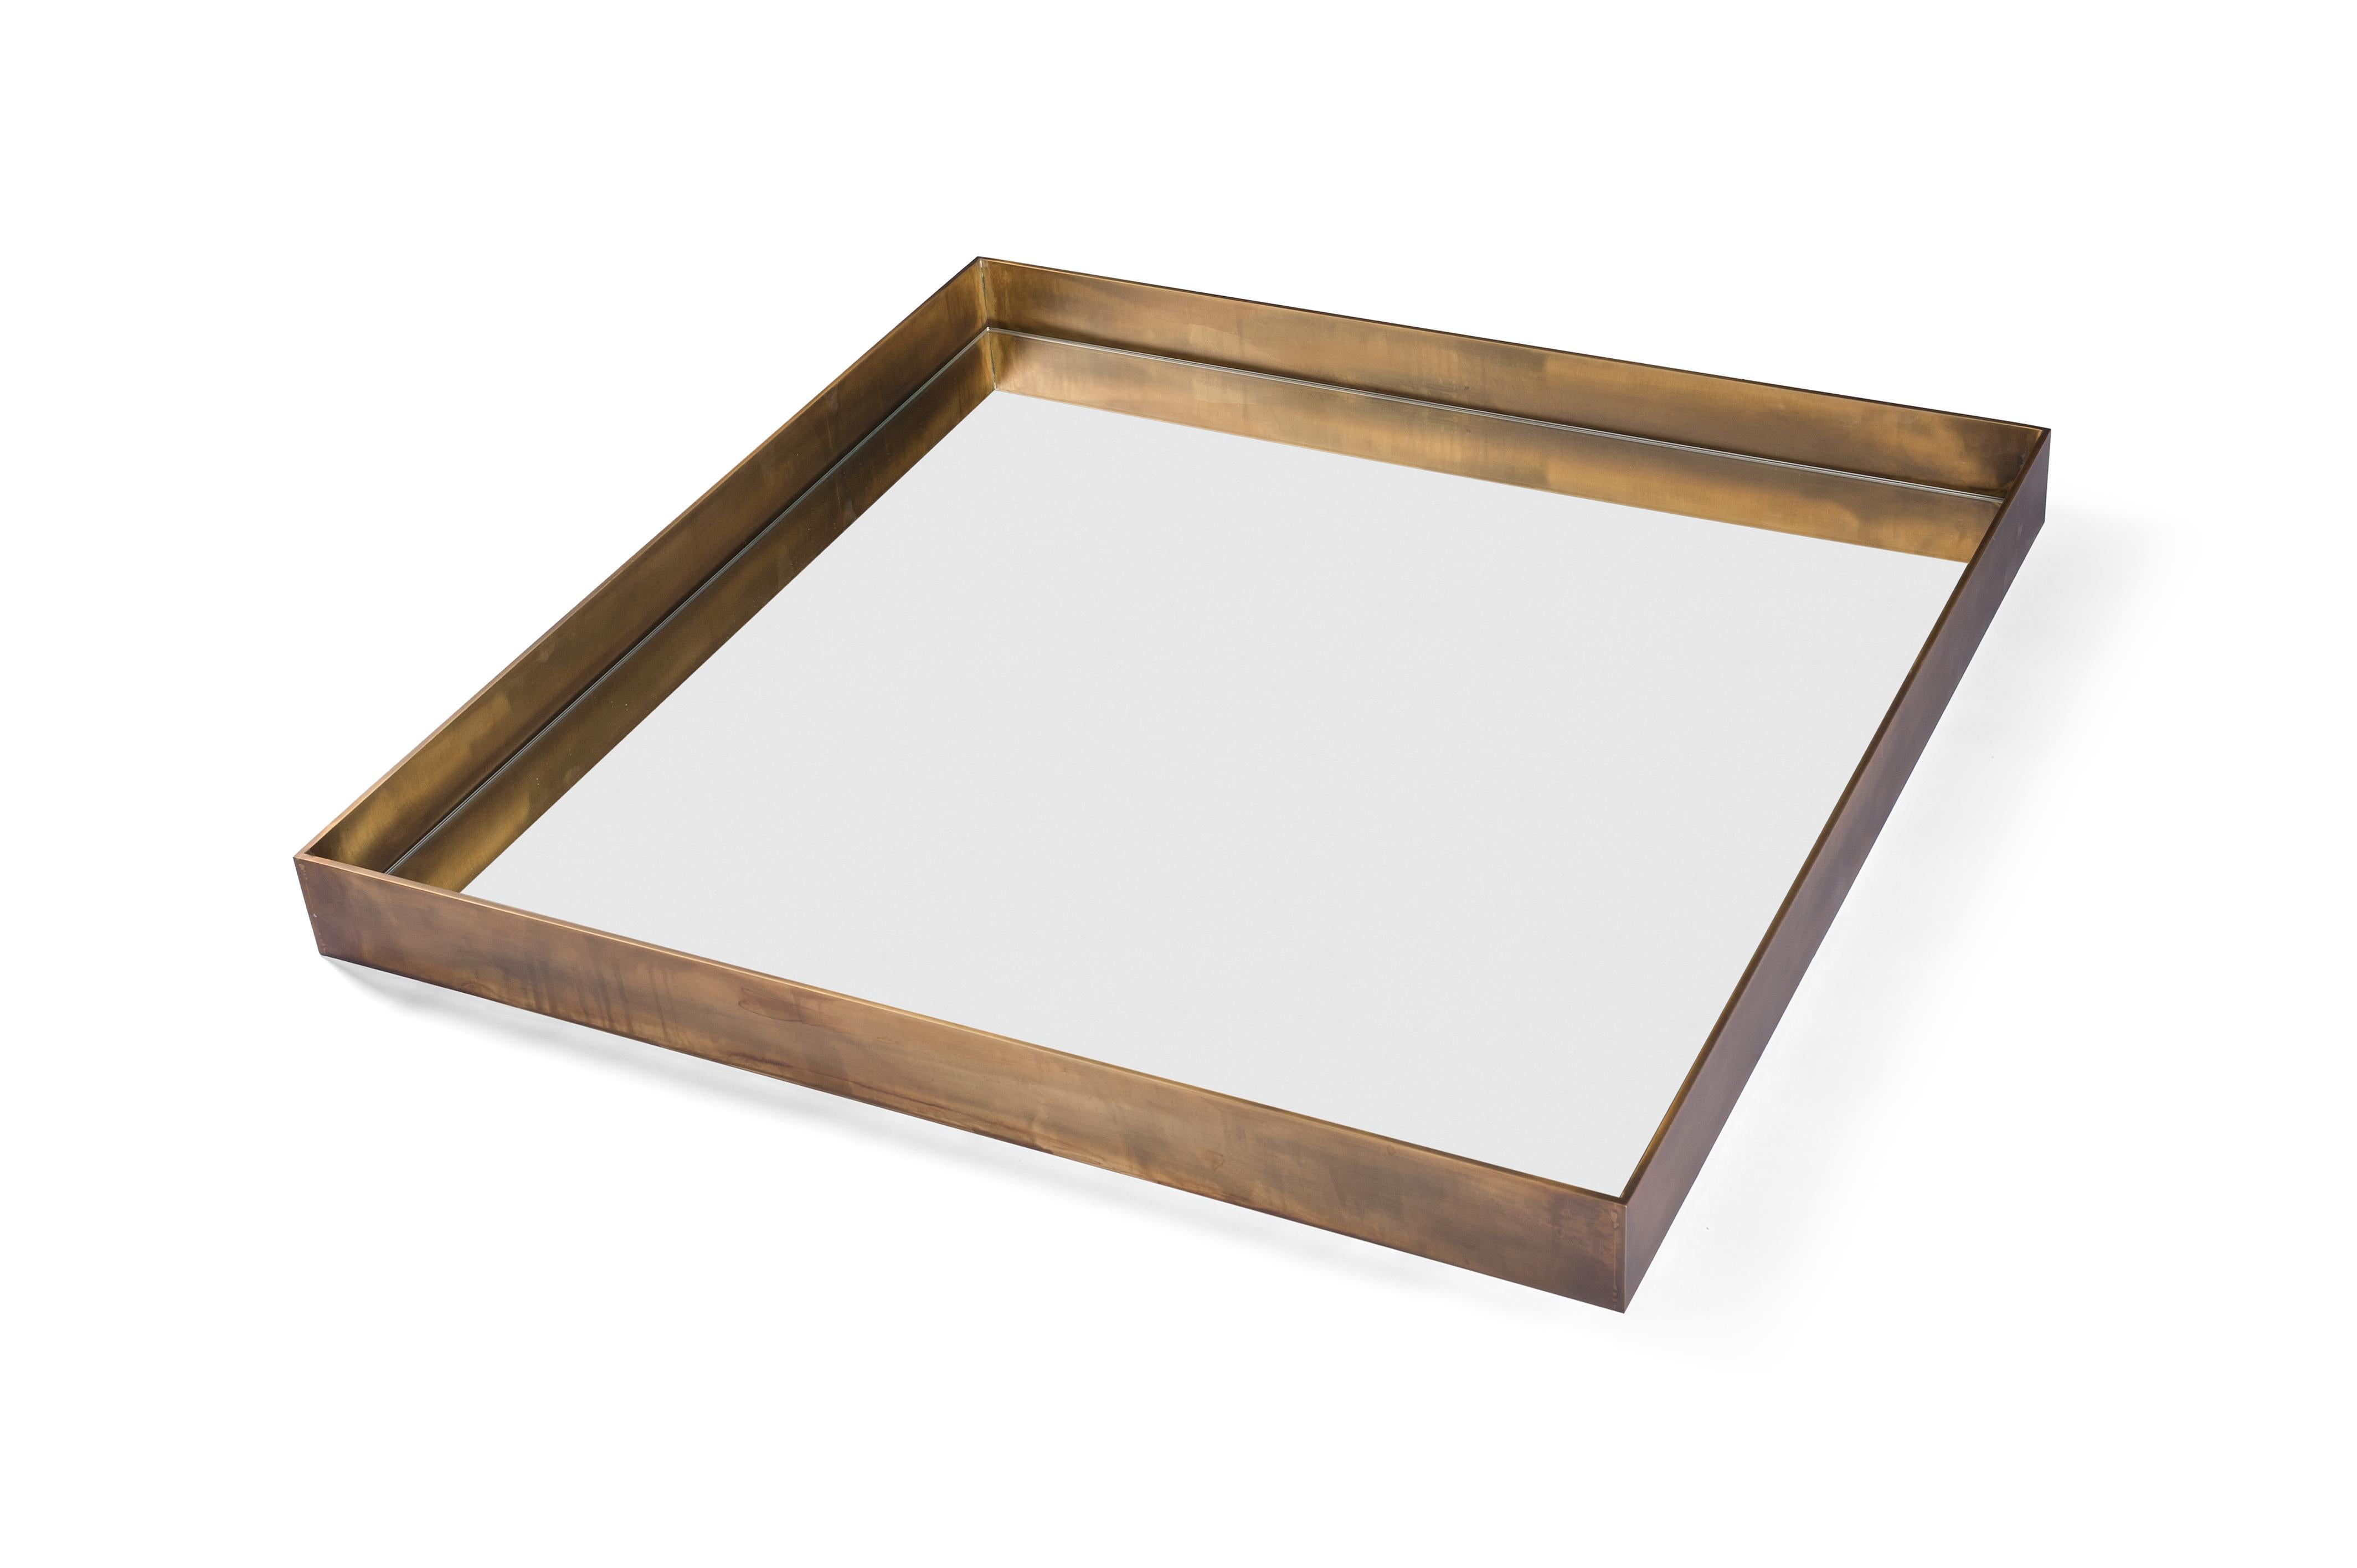 The depth of the burnished brass frame is the defining feature of the Quadro mirror. At 7.5 cm, it not only creates a bold aesthetic, but is also highly practical, creating a handy ledge for bathroom products and other items. Quadro makes an impact